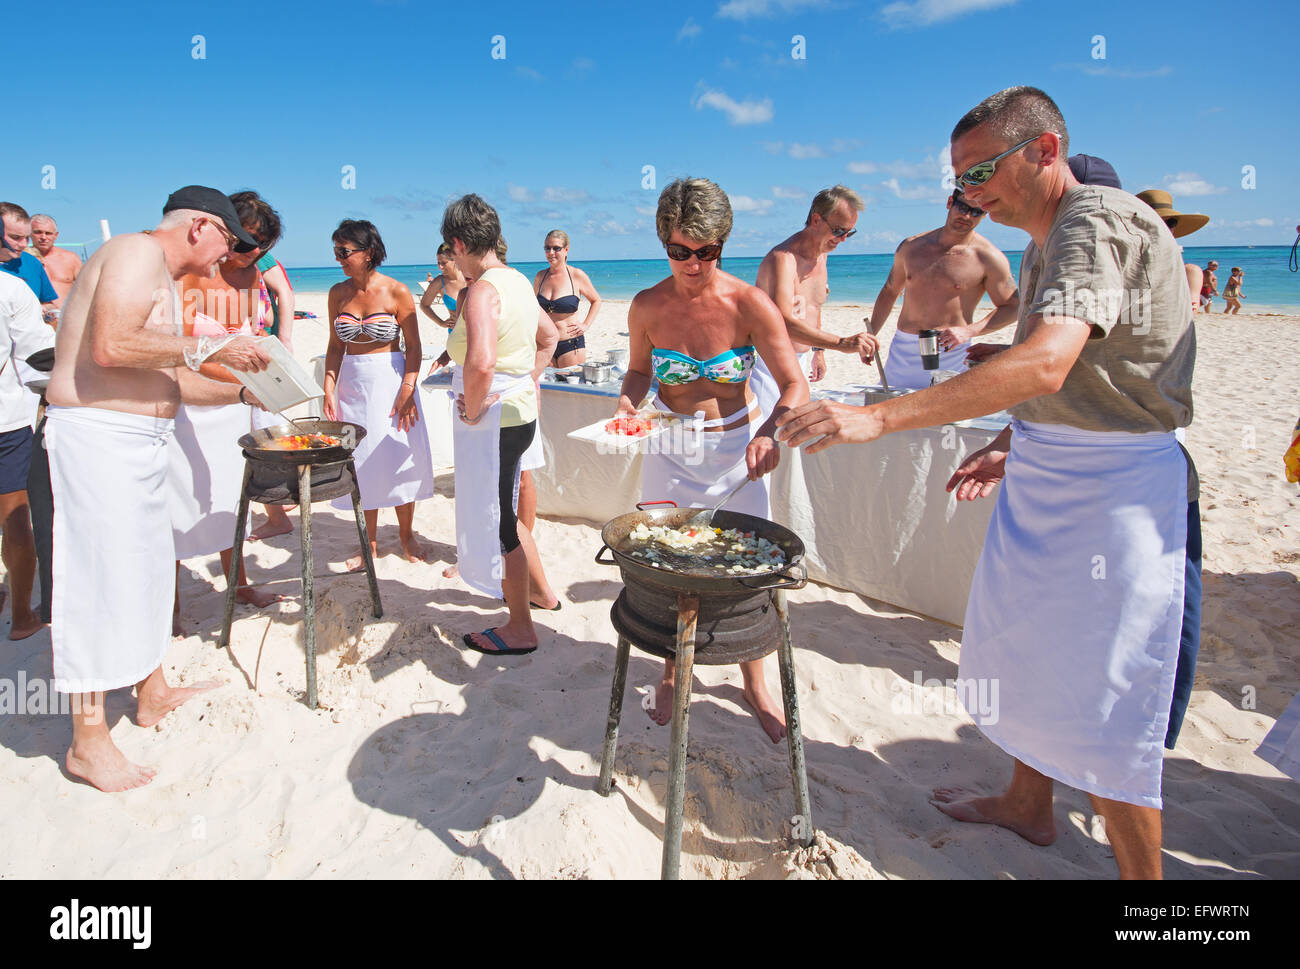 DOMINICAN REPUBLIC. Holidaymakers competing in a paella cook-off on Punta Cana beach. 2015. Stock Photo